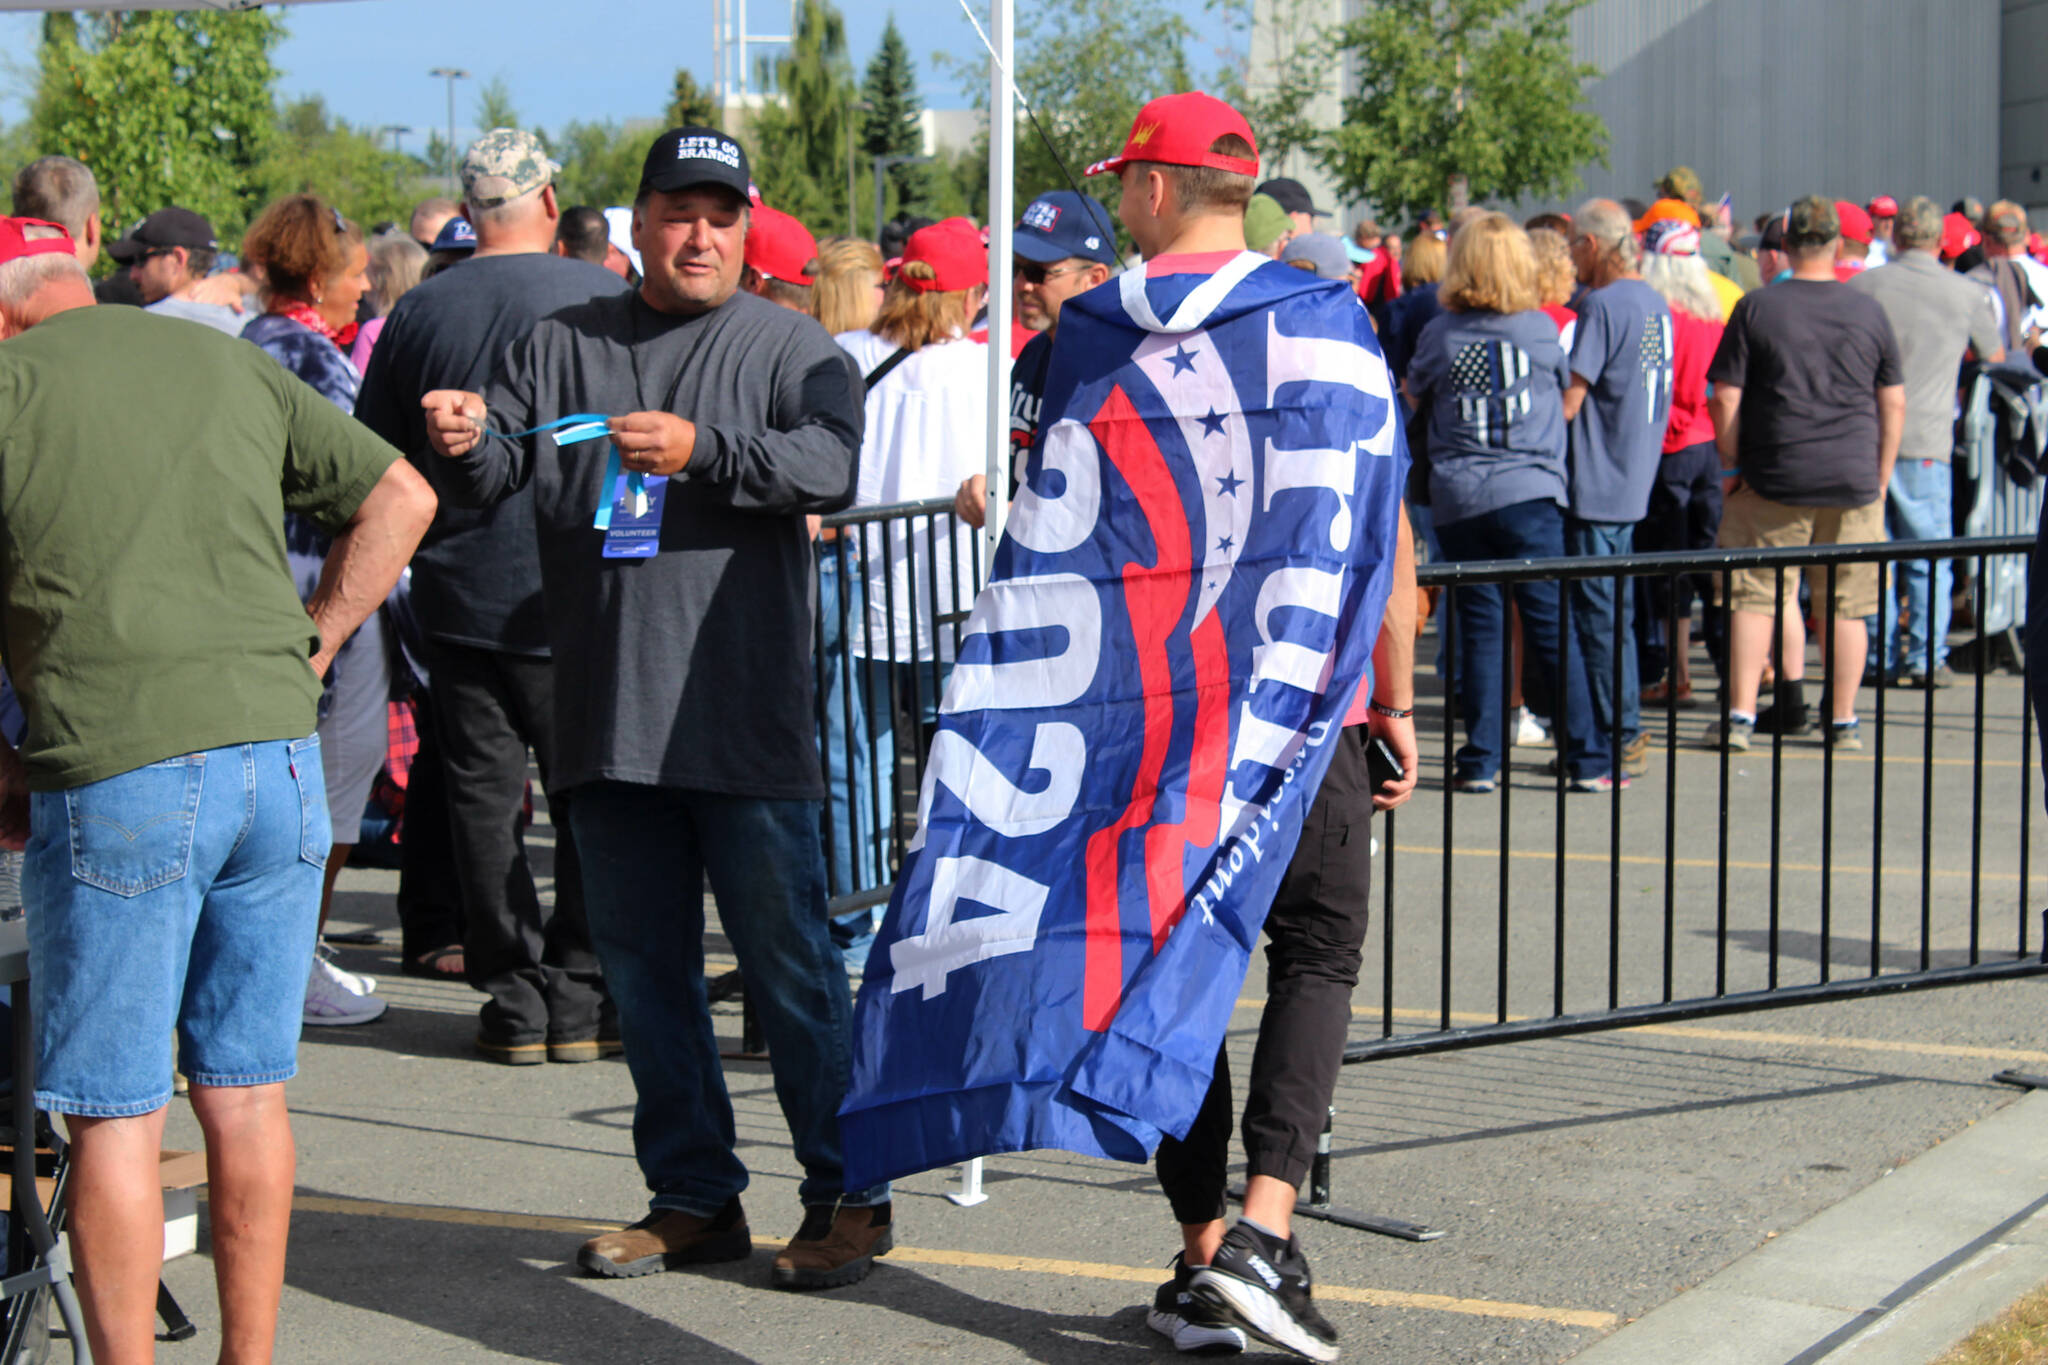 A person wearing a Trump flag stands outside of the Alaska Airlines Center, where a Save America rally was being held, on Saturday, July 9, 2022, in Anchorage, Alaska. Former President Donald Trump, U.S. Senate candidate Kelly Tshibaka and U.S. House candidate Sarah Palin were among the event’s speakers. (Ashlyn O’Hara/Peninsula Clarion)
A person wearing a Trump flag stands outside of the Alaska Airlines Center, where a Save America rally was being held, on Saturday, July 9, 2022, in Anchorage, Alaska. Former President Donald Trump, U.S. Senate candidate Kelly Tshibaka and U.S. House candidate Sarah Palin were among the event’s speakers. (Ashlyn O’Hara/Peninsula Clarion)